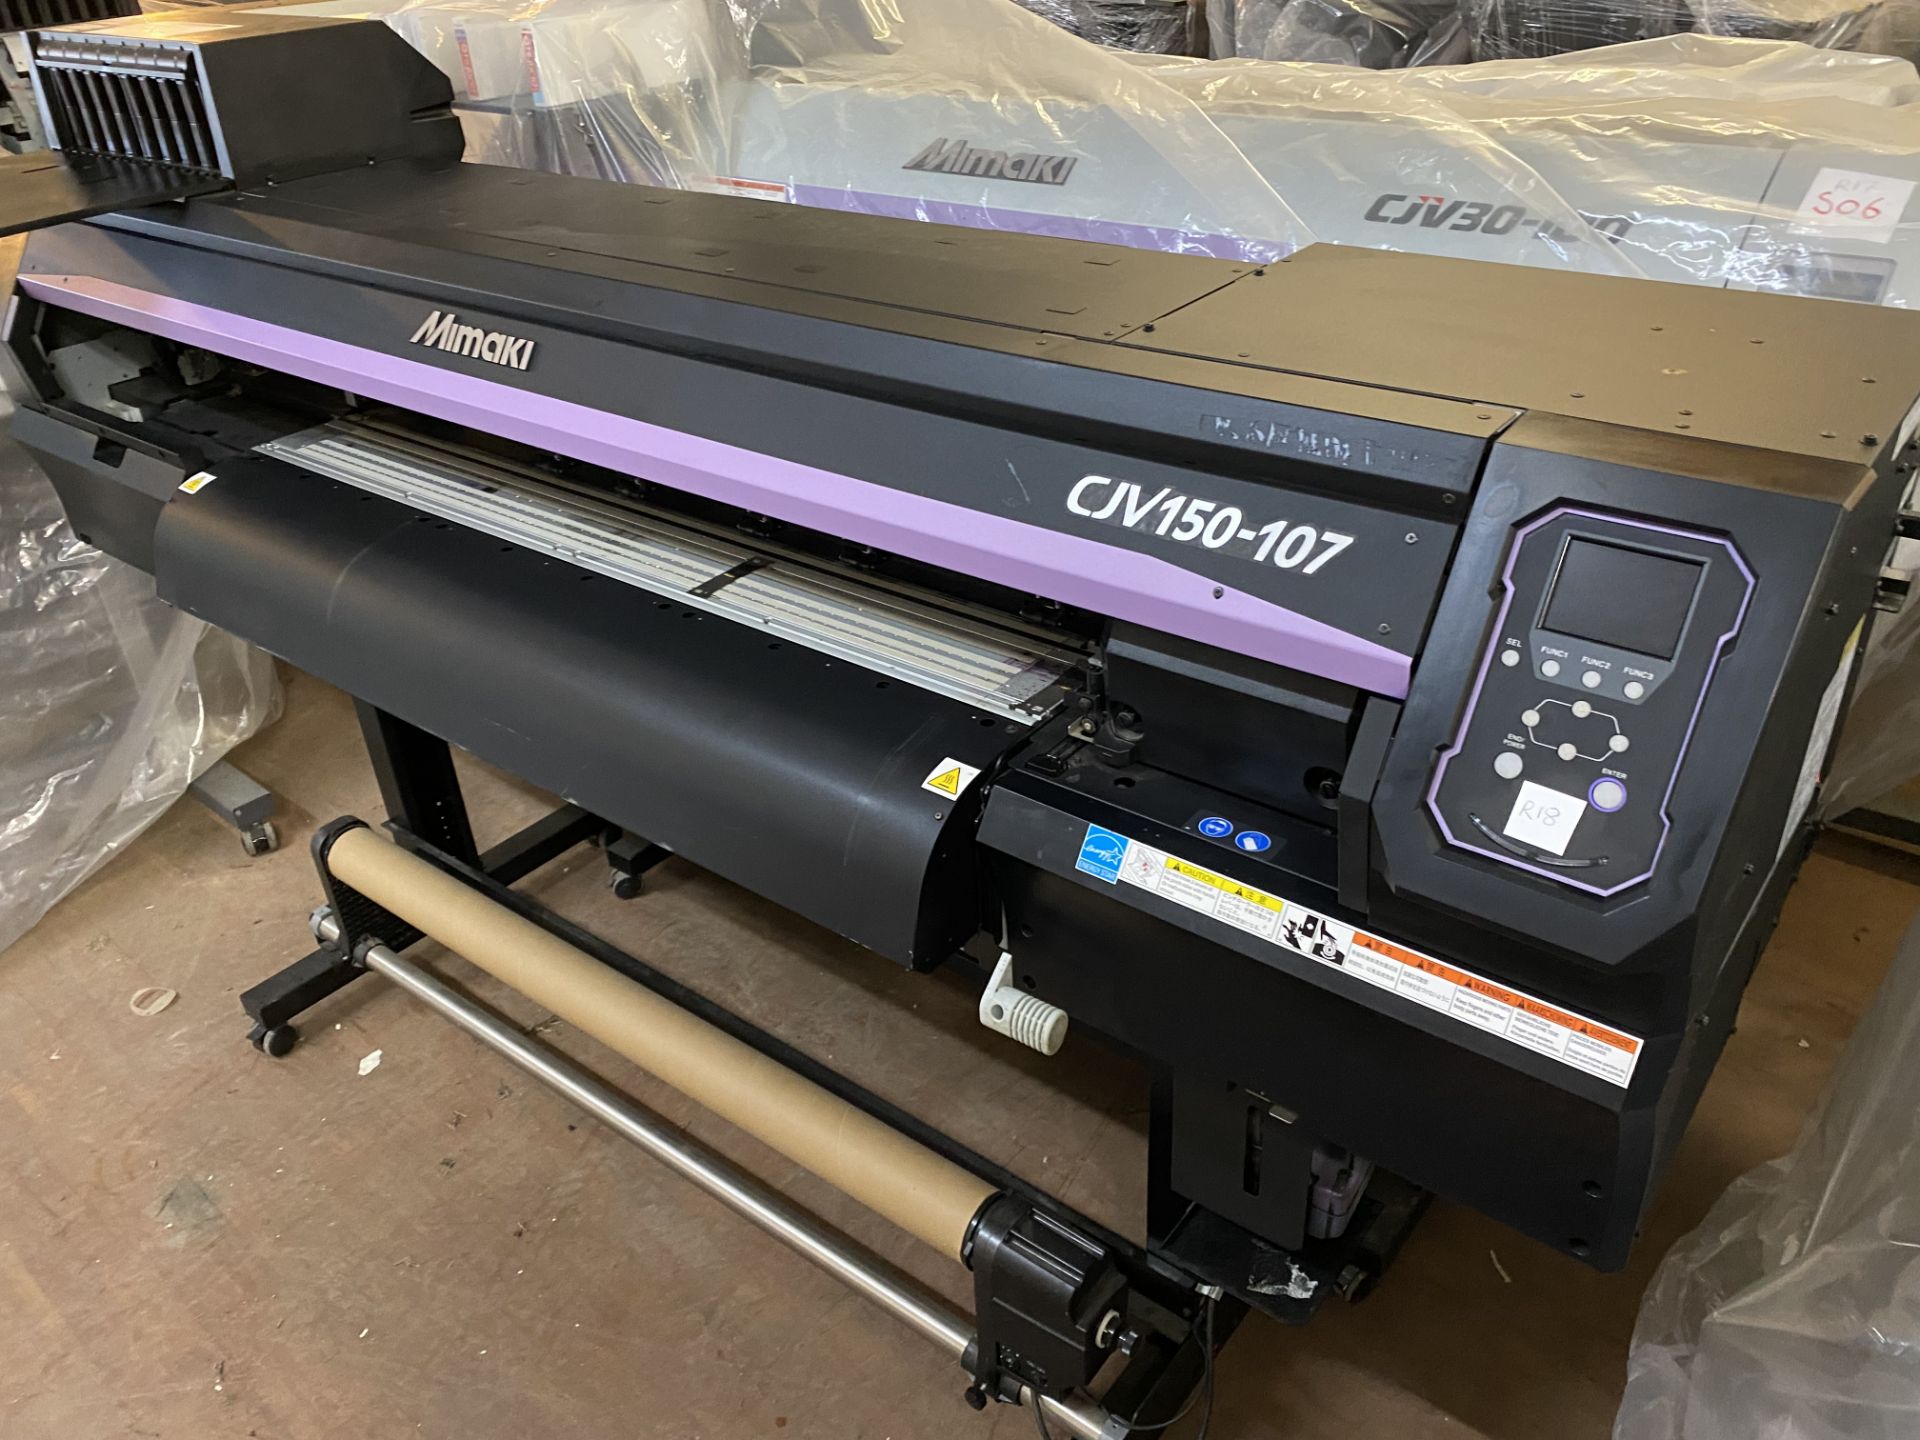 (R18) MIMAKI CJV 150-107 ECO SOLVENT PRINT AND CUT LARGE FORMAT PRINTER - Image 2 of 3